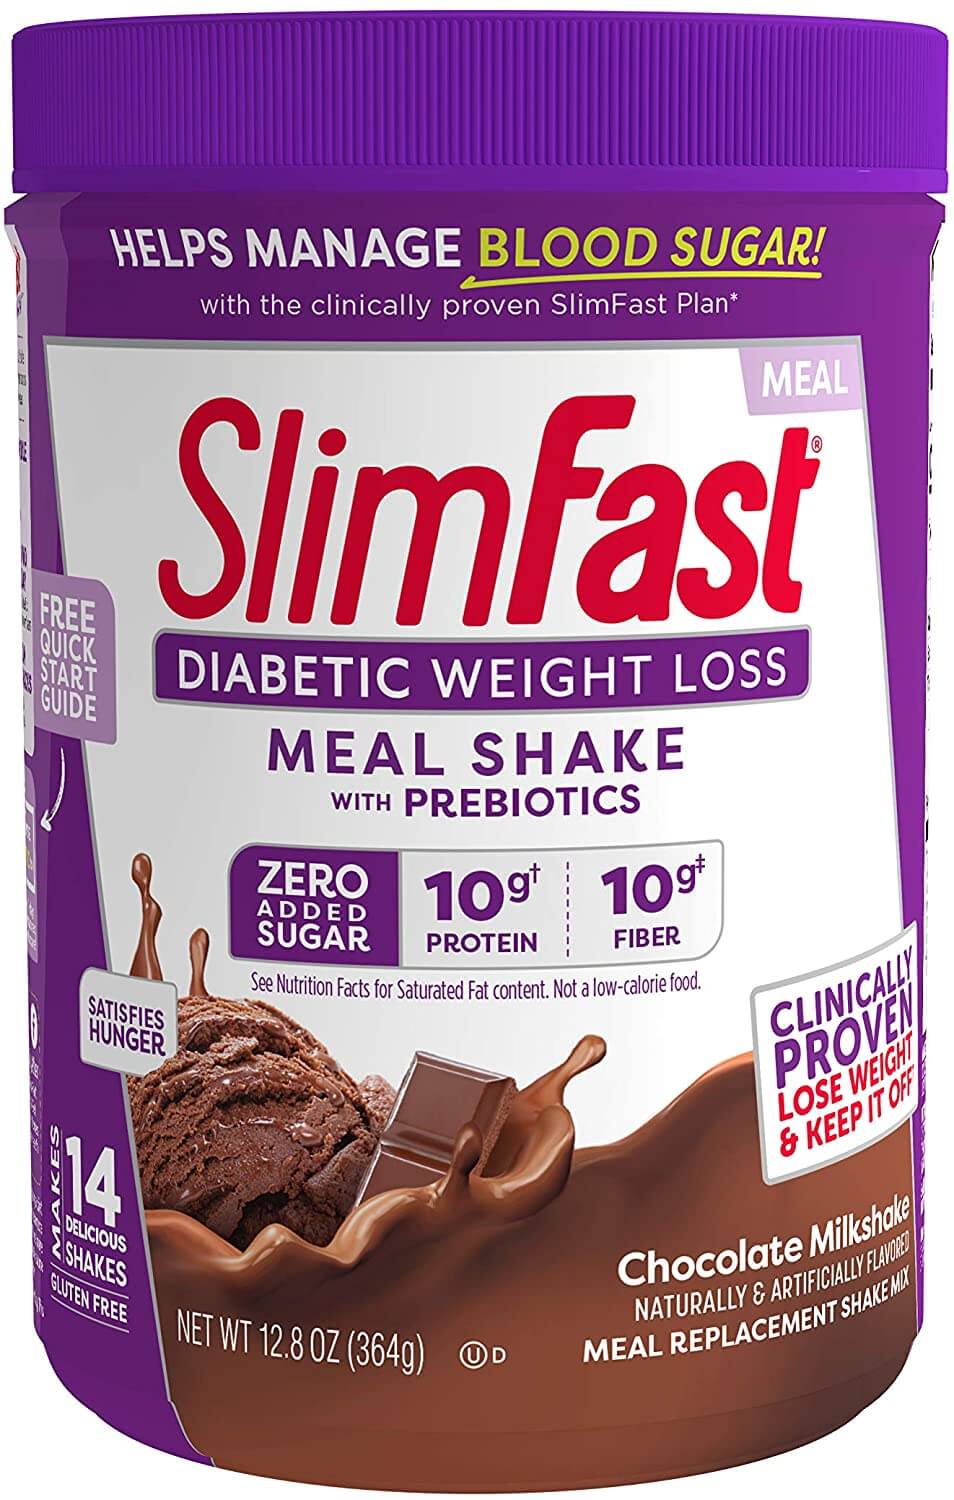 Slimfast Diabetic Weight Loss meal replacement powder